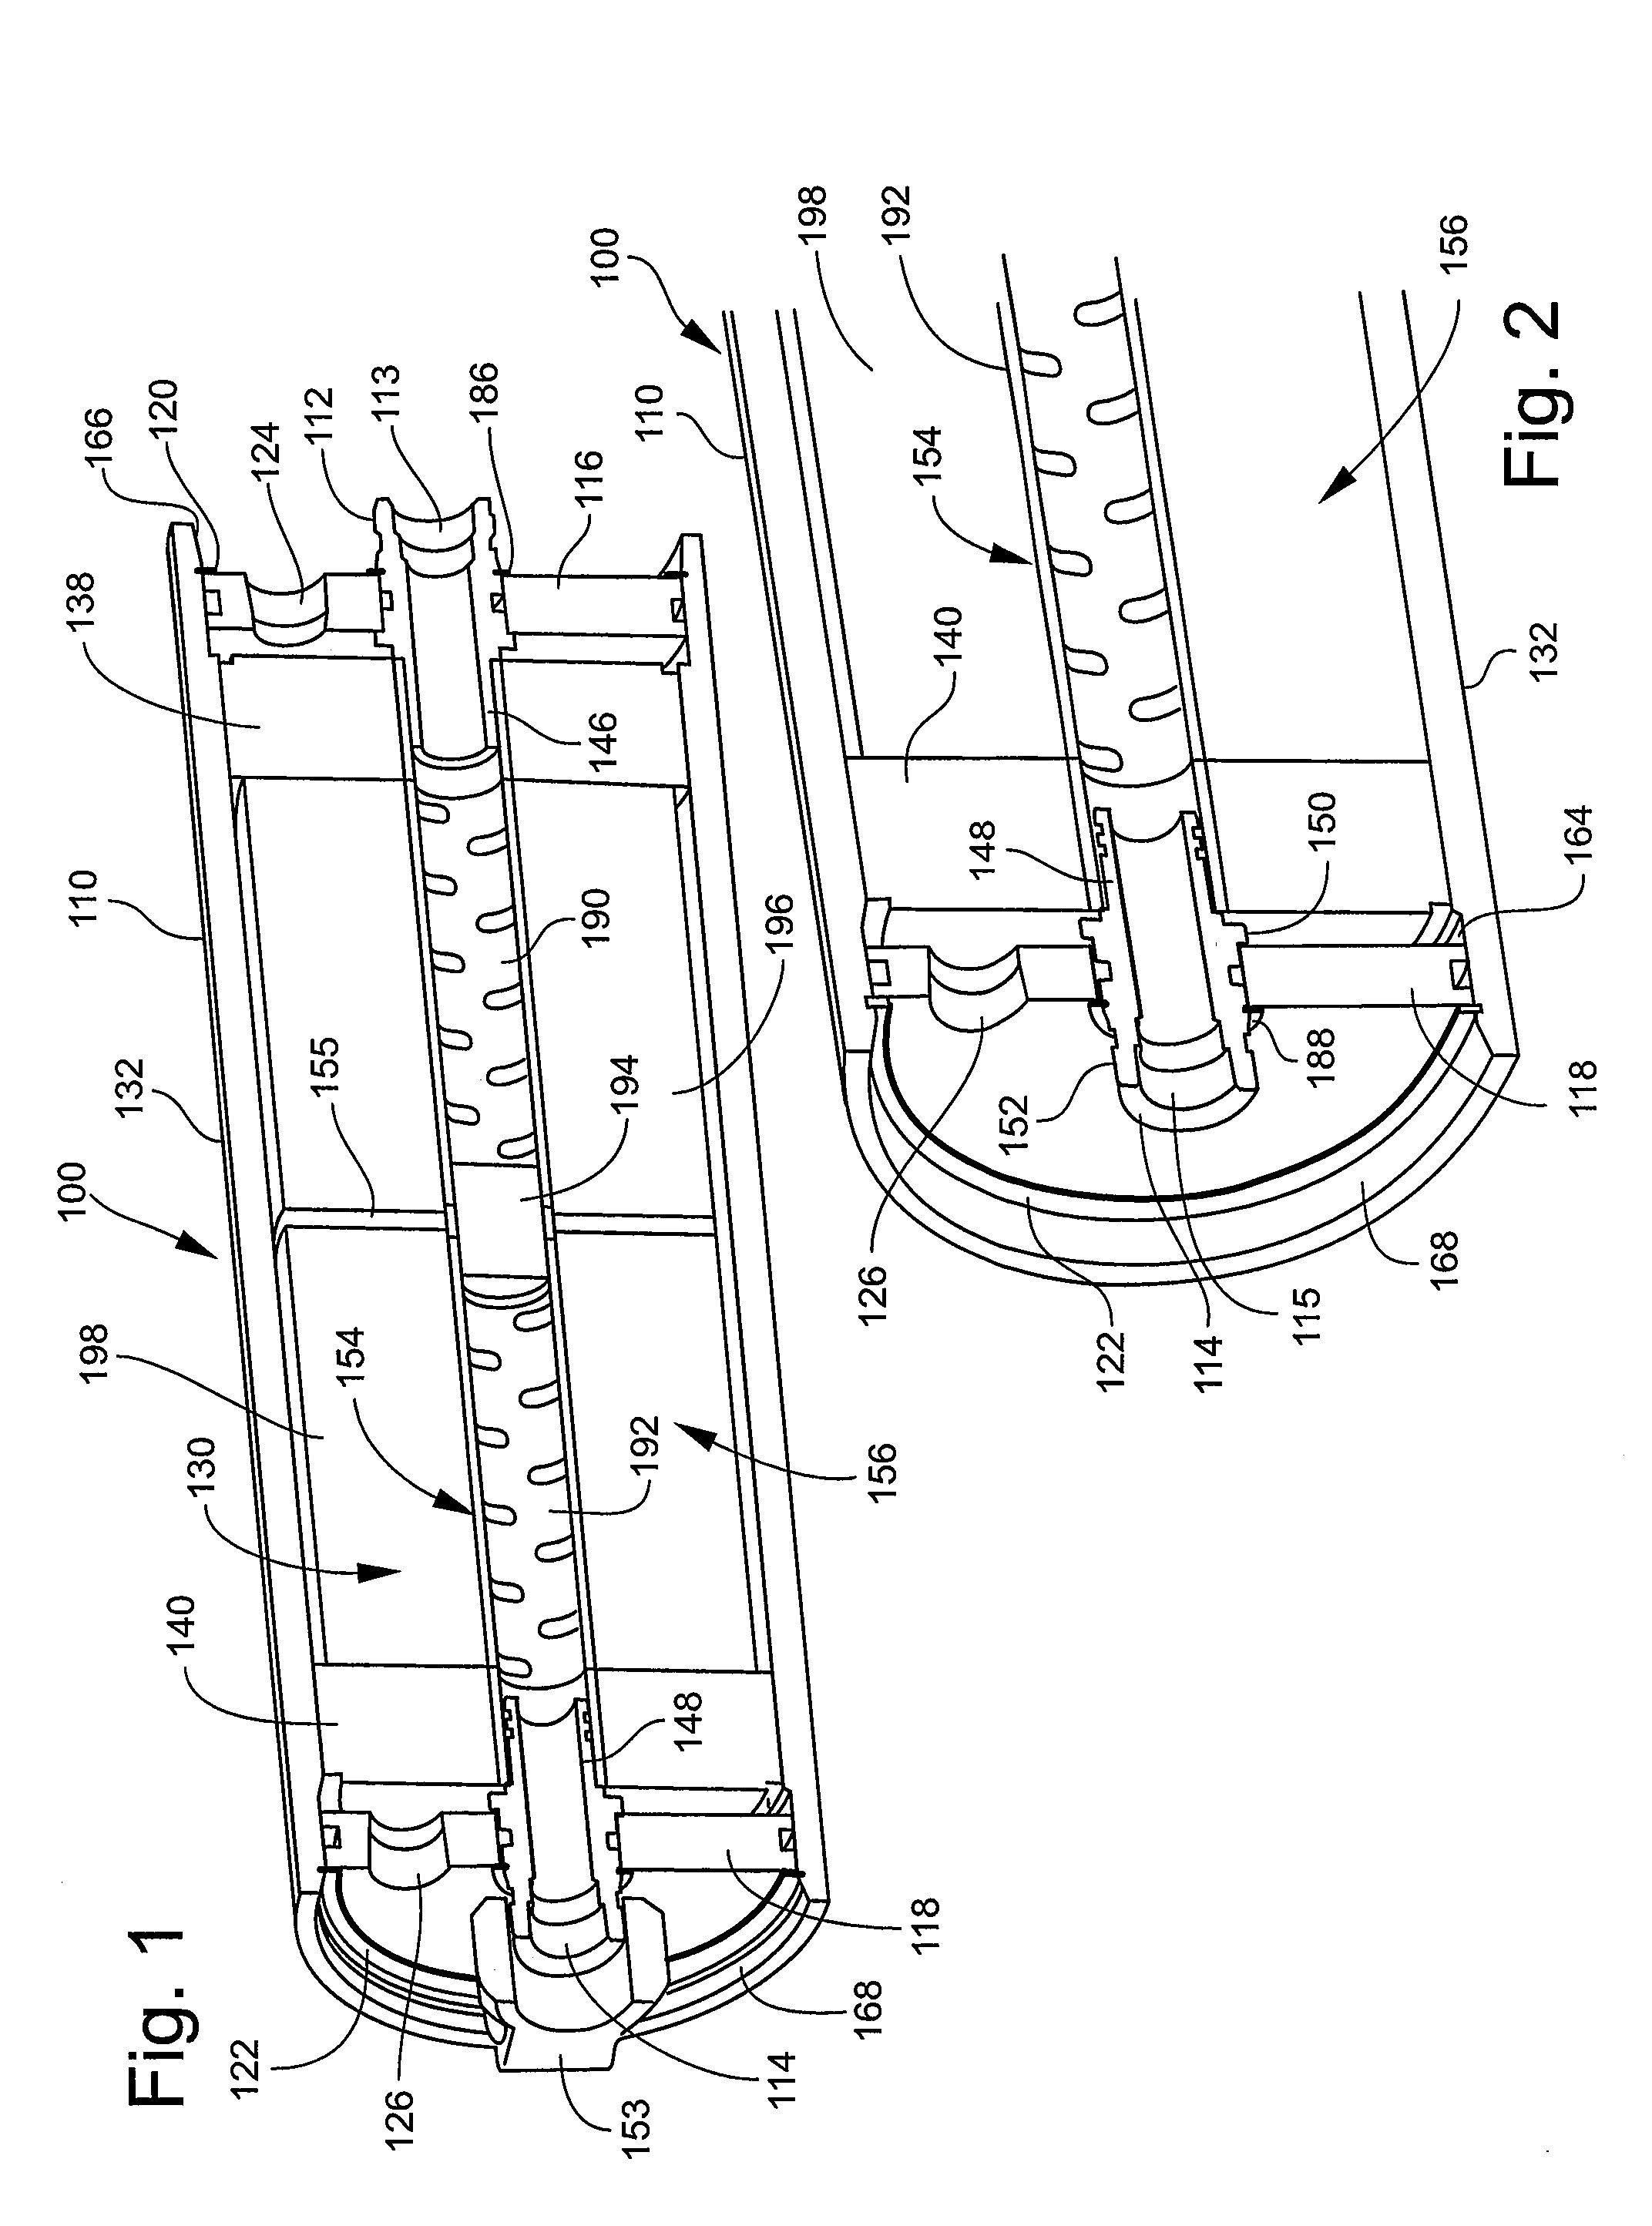 Membrane contactors and systems for membrane distillation or ammonia removal and related methods